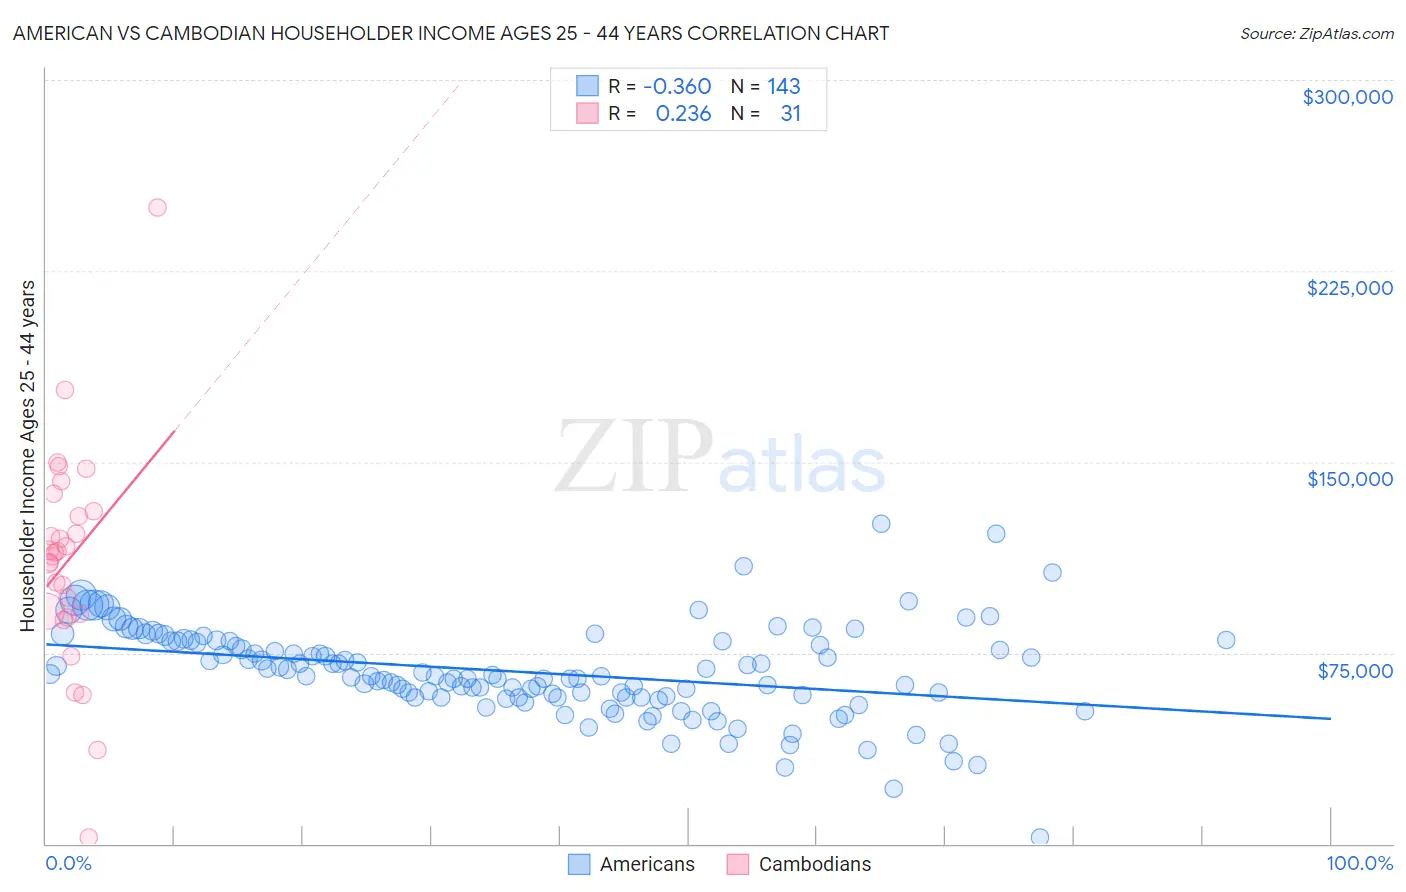 American vs Cambodian Householder Income Ages 25 - 44 years